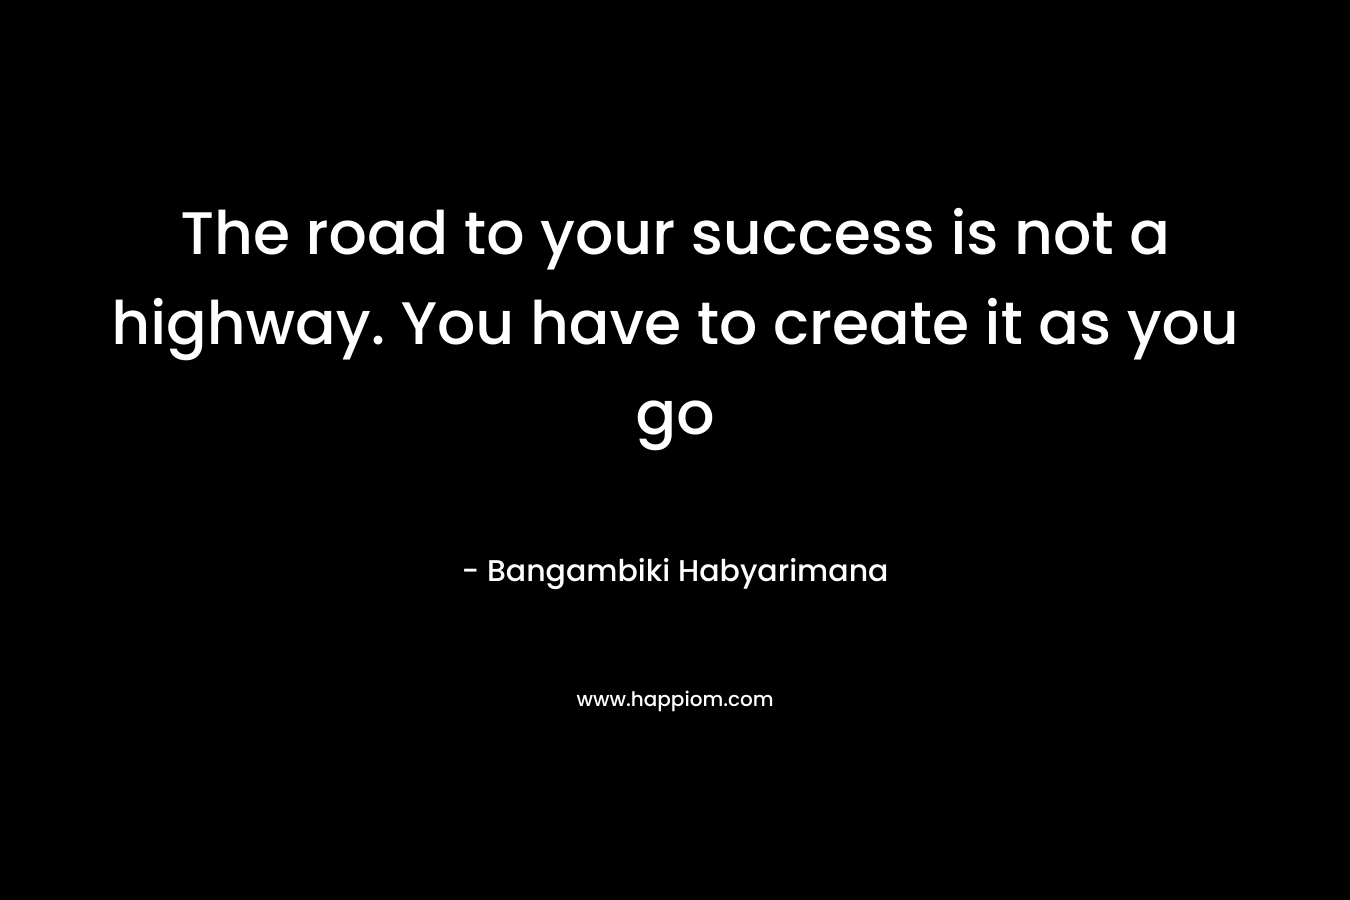 The road to your success is not a highway. You have to create it as you go – Bangambiki Habyarimana